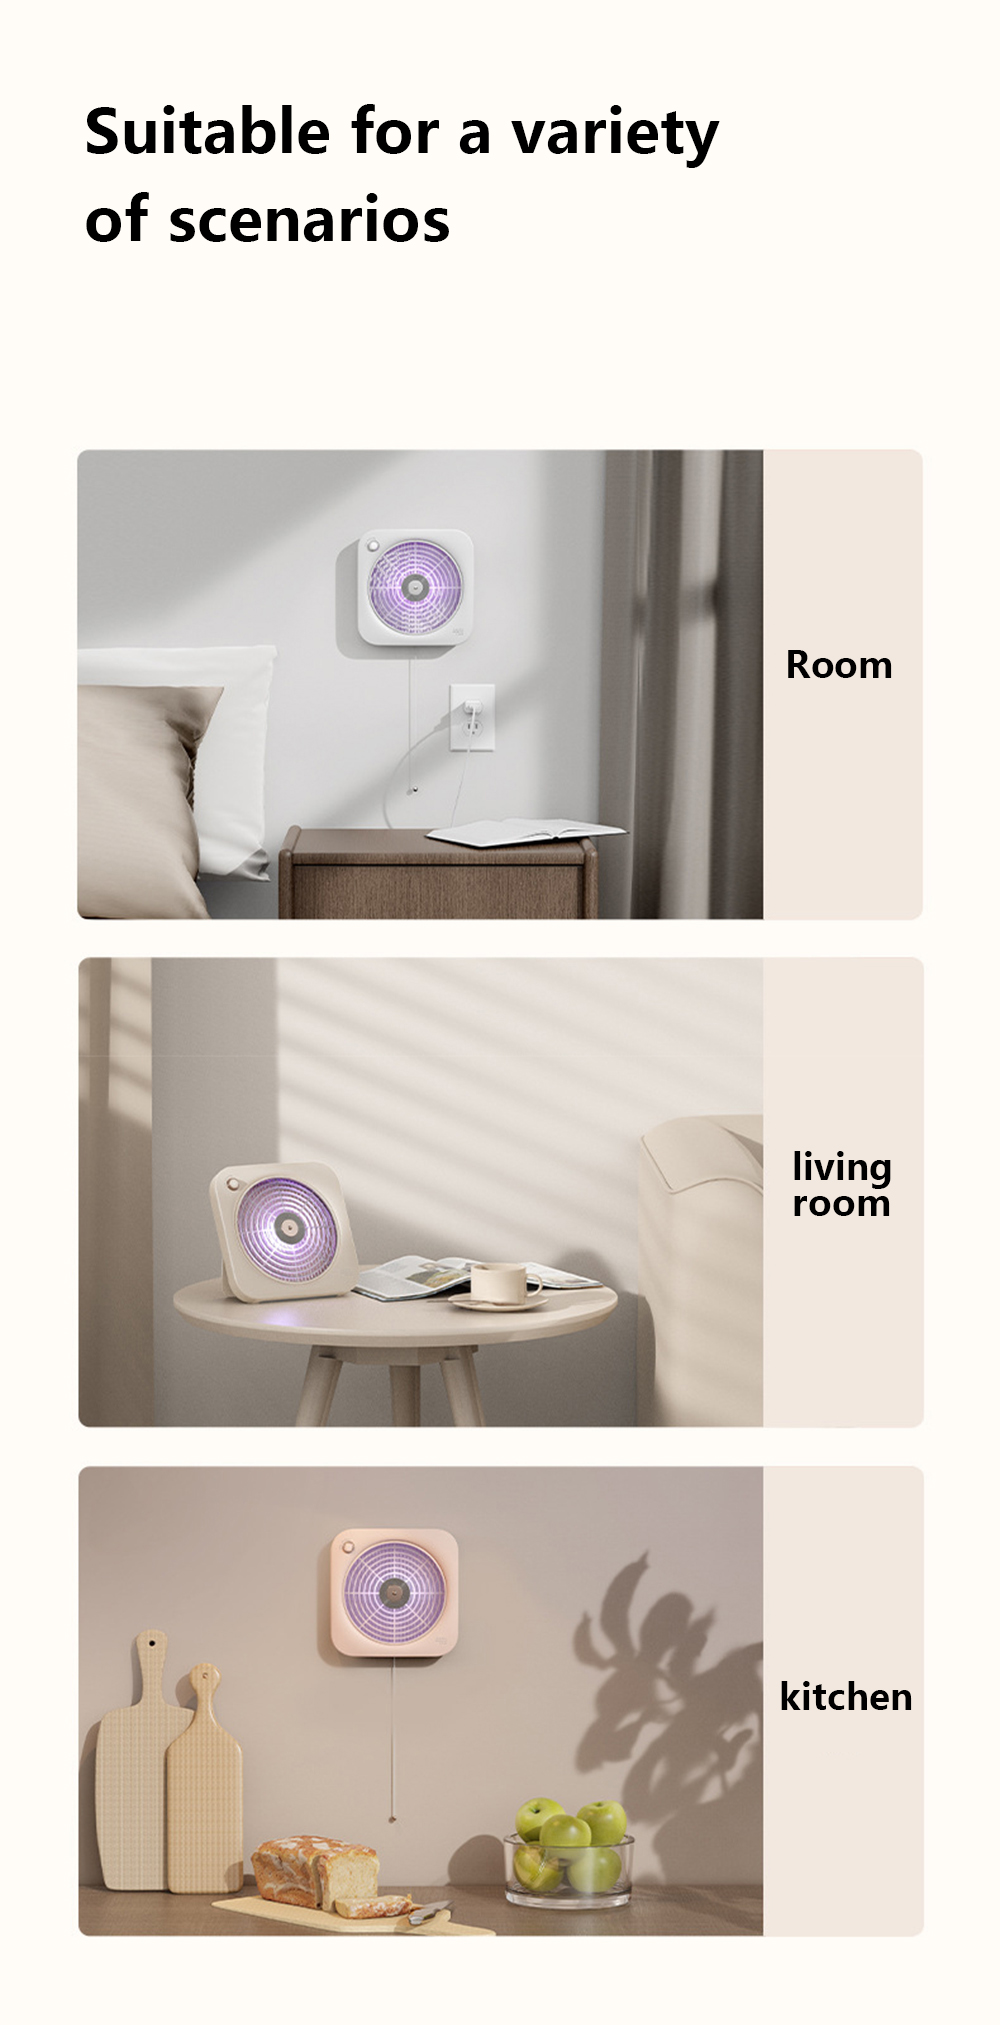 MAOXIN-Multifunctional-Mosquito-Killer-Lamp-Desktop-VerticalWall-Mount-Mosquito-Lamp-With-Small-Nigh-1953884-6